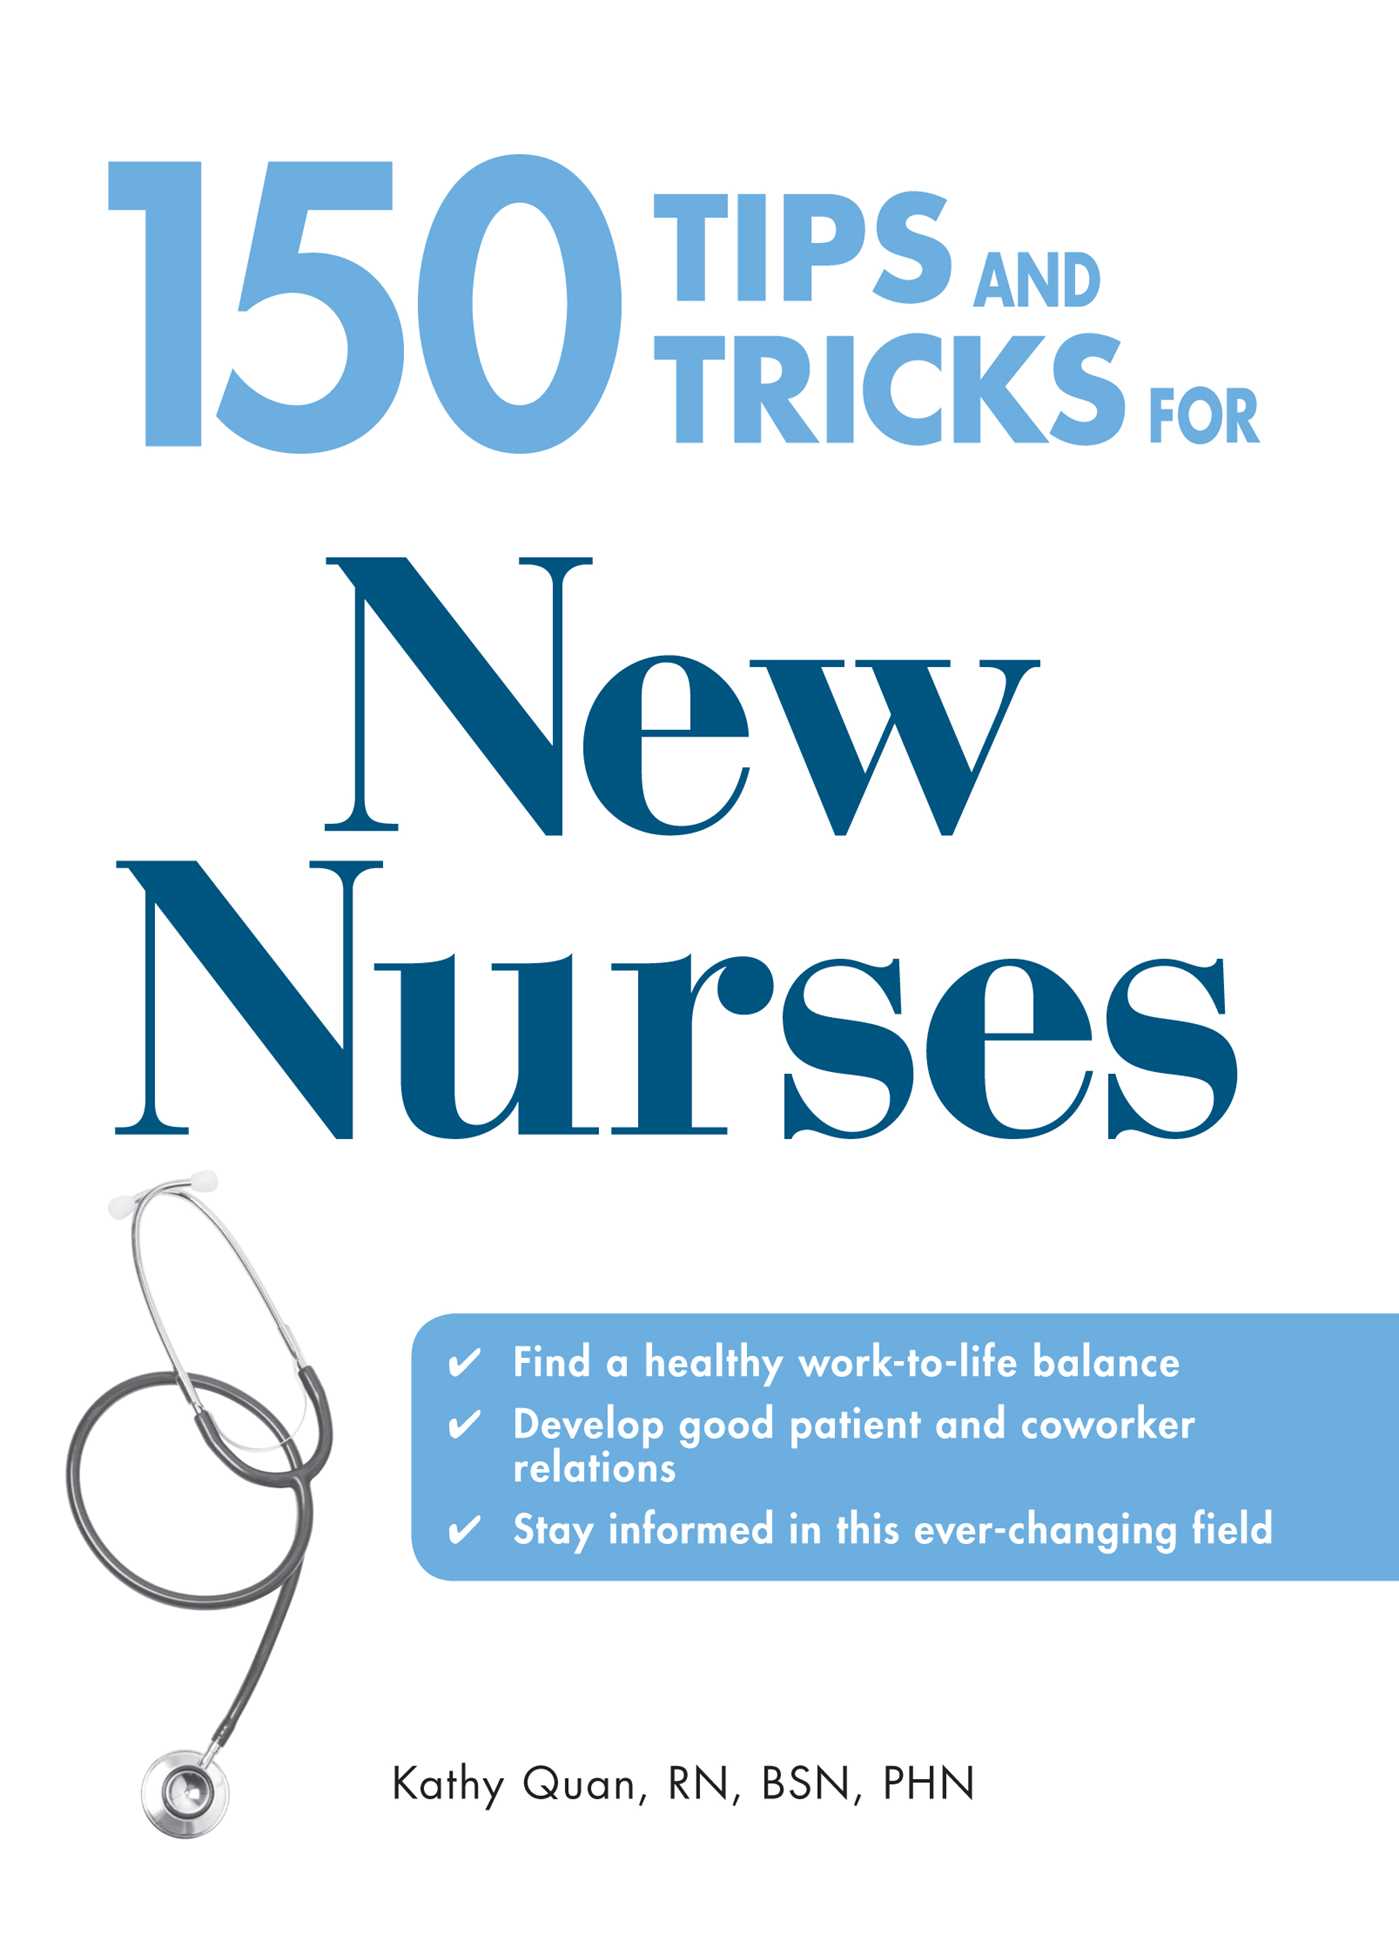 150 Tips and Tricks for New Nurses : Balance a hectic schedule and get the sleep you need…Avoid illness and stay positive…Continue your education and keep up with medical advances